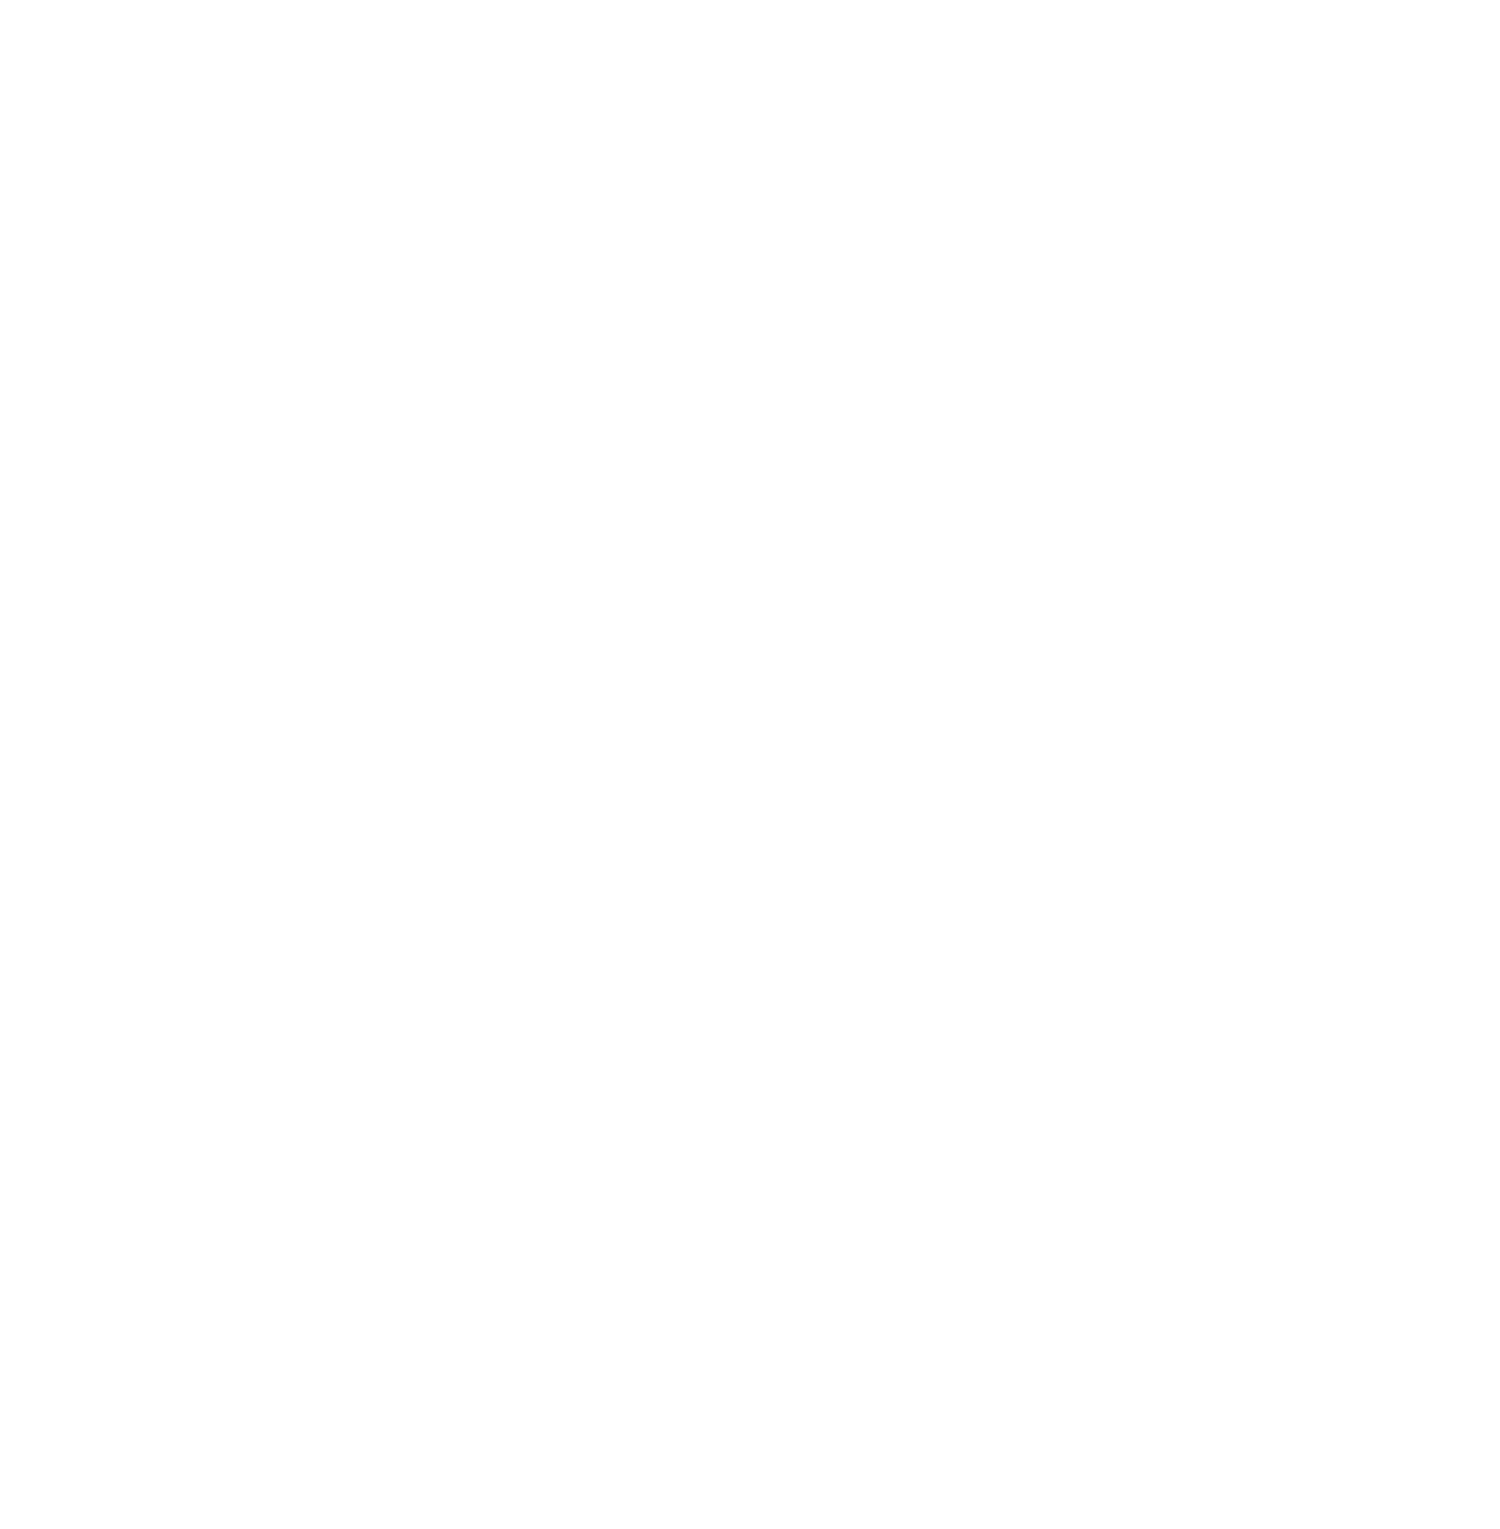 ONE PM GROUP.